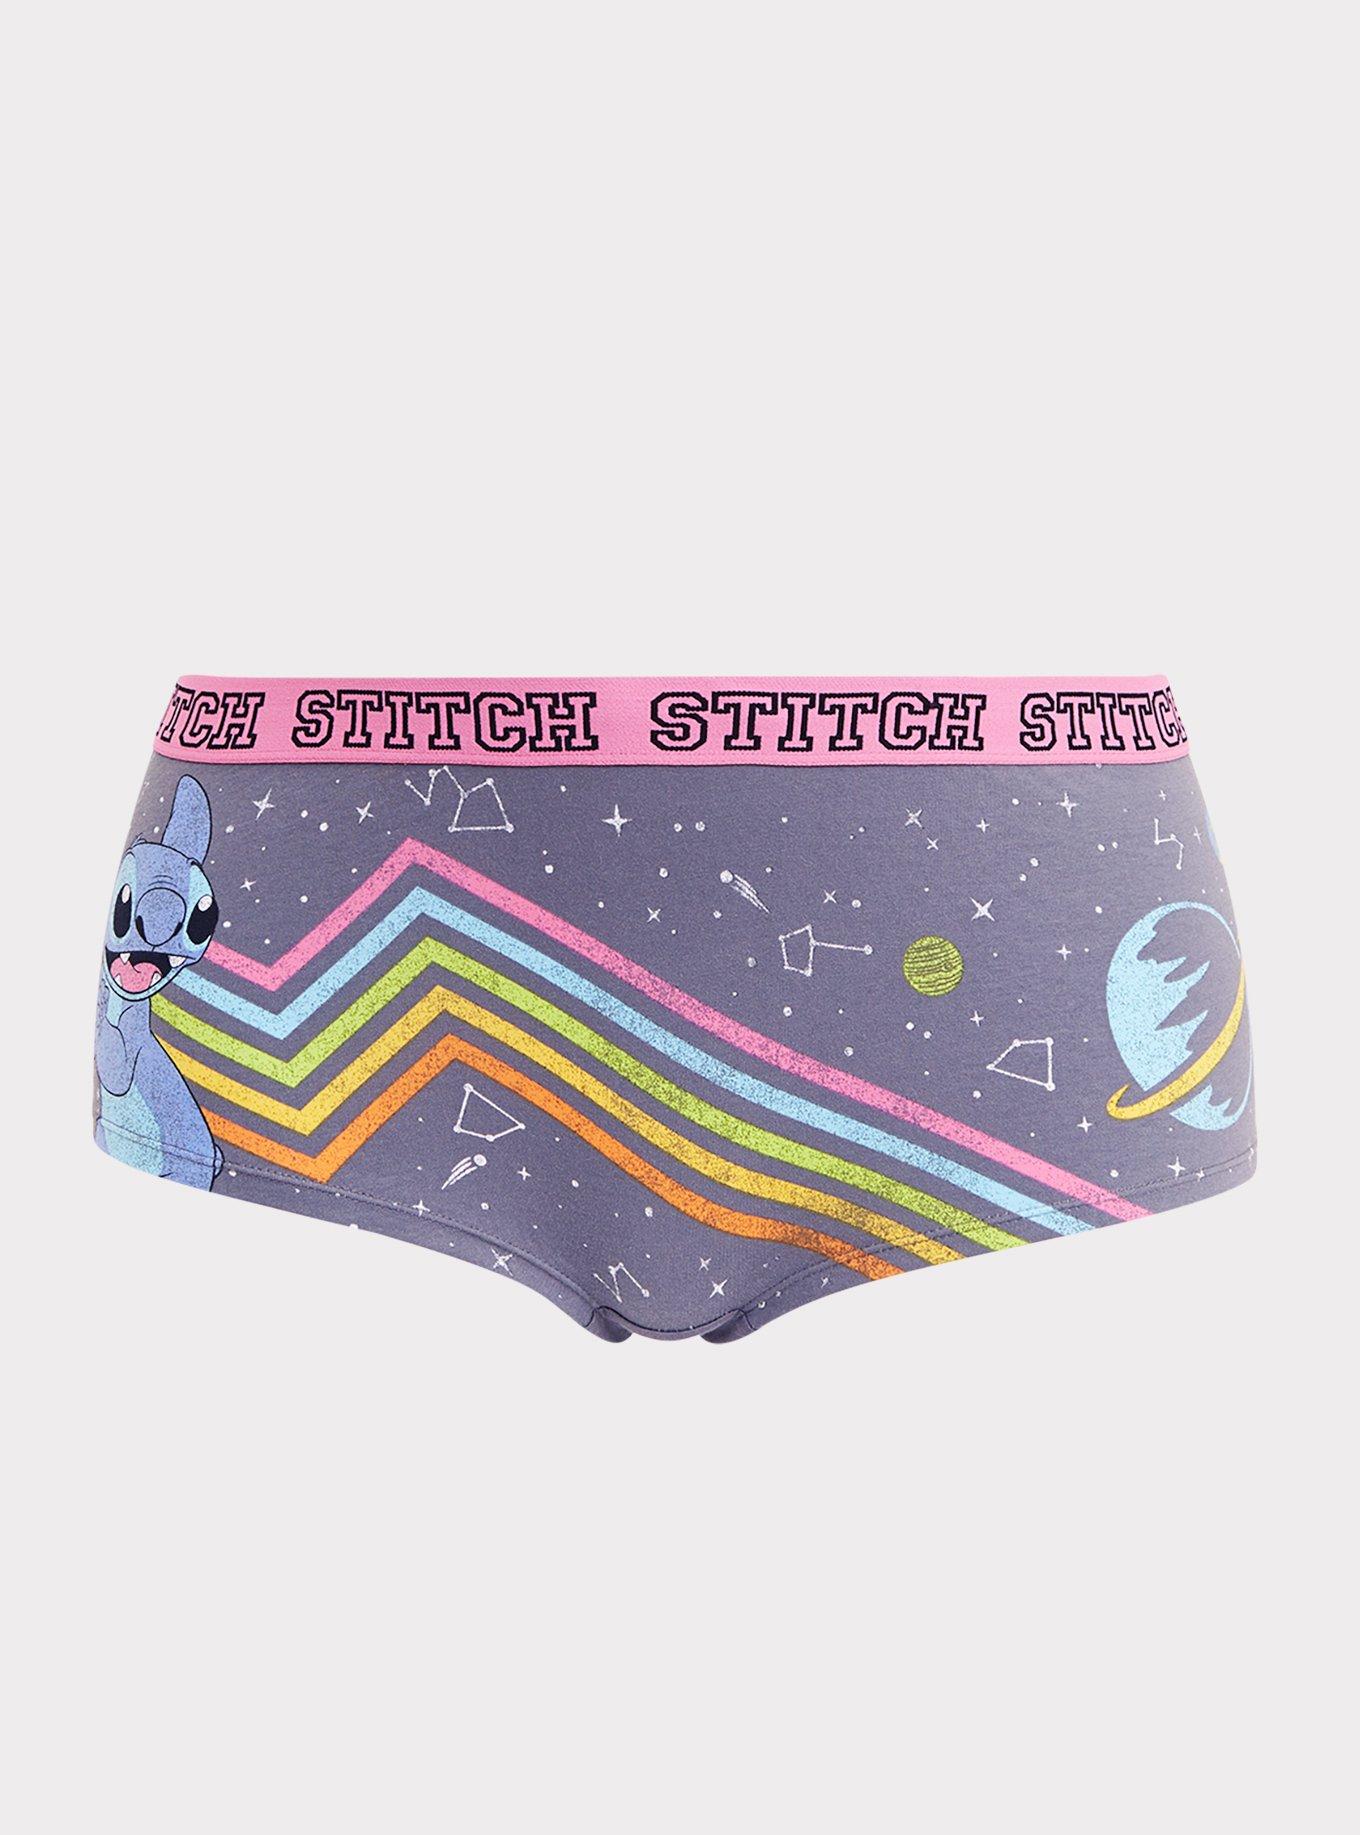 Rainbow Panties With Clouds and Sun, Cute Underwear, Unique